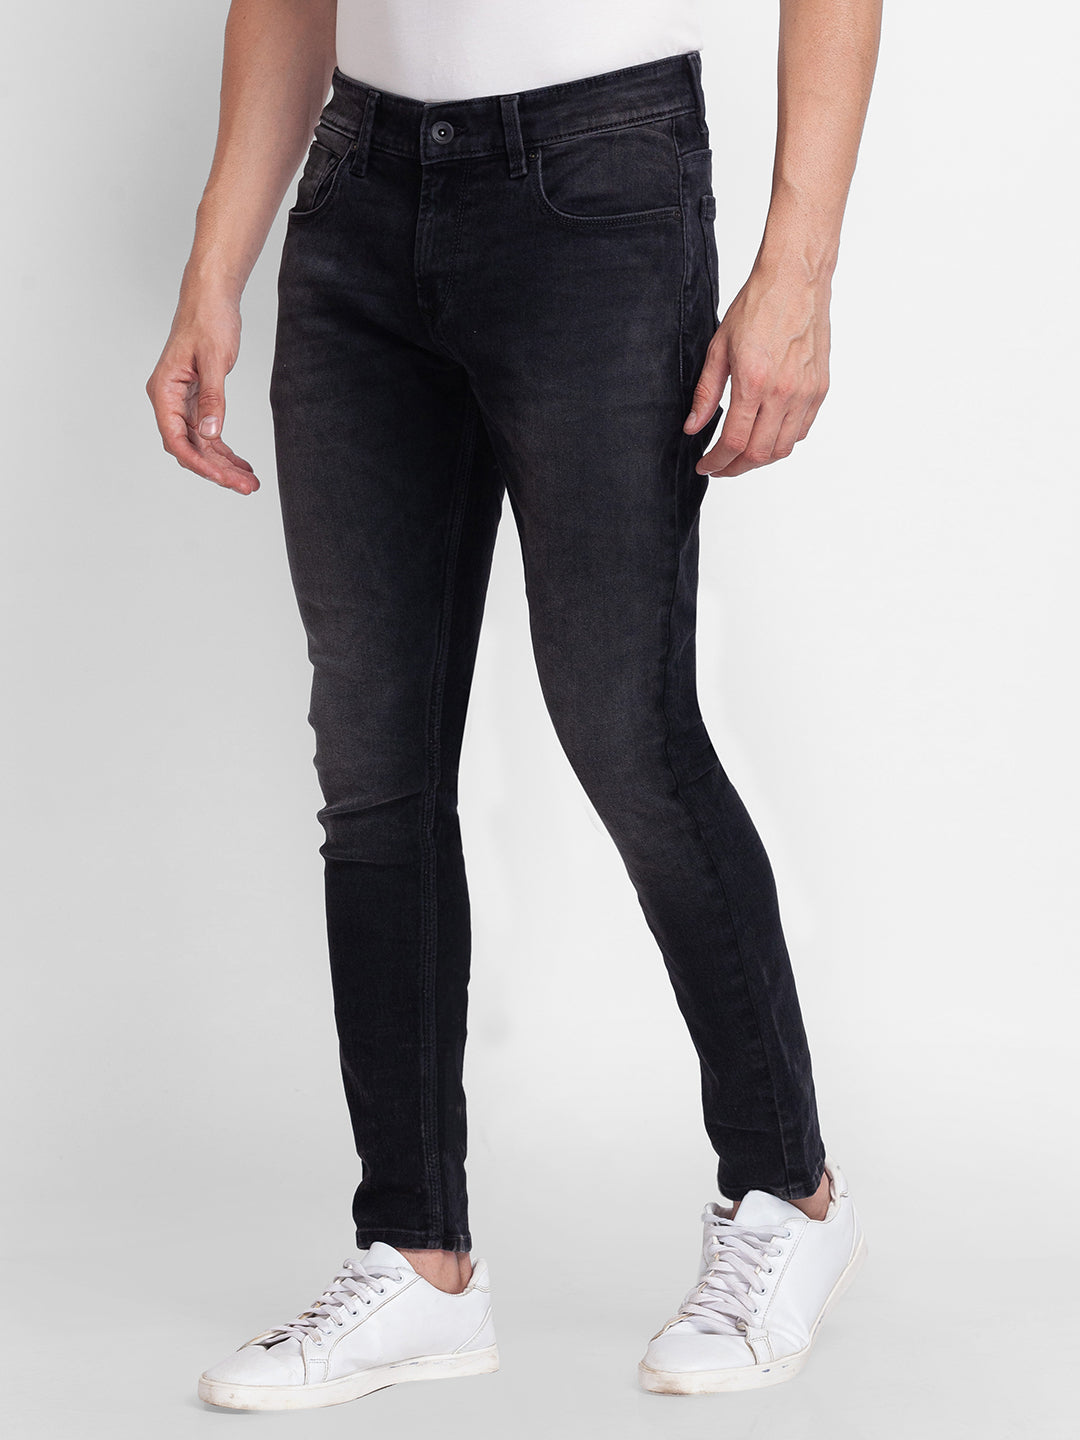 Spykar Charcoal Black Cotton Slim Fit Tapered Length Jeans For Men (Kano)